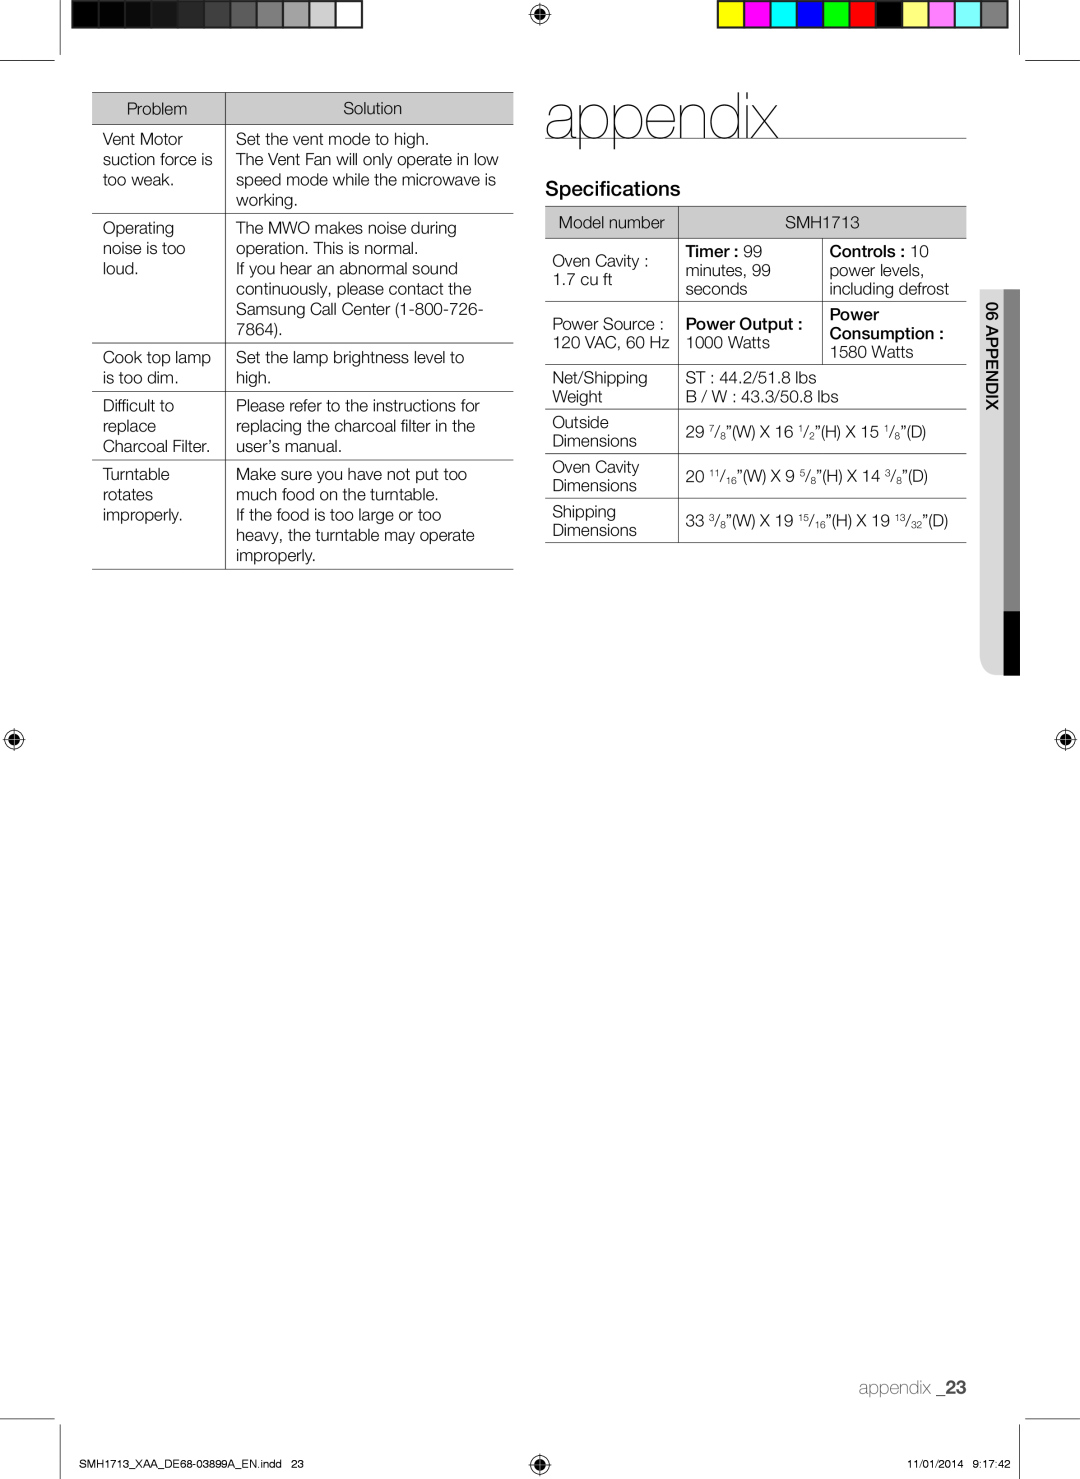 Samsung SMH1713 user manual appendix, Specifications 